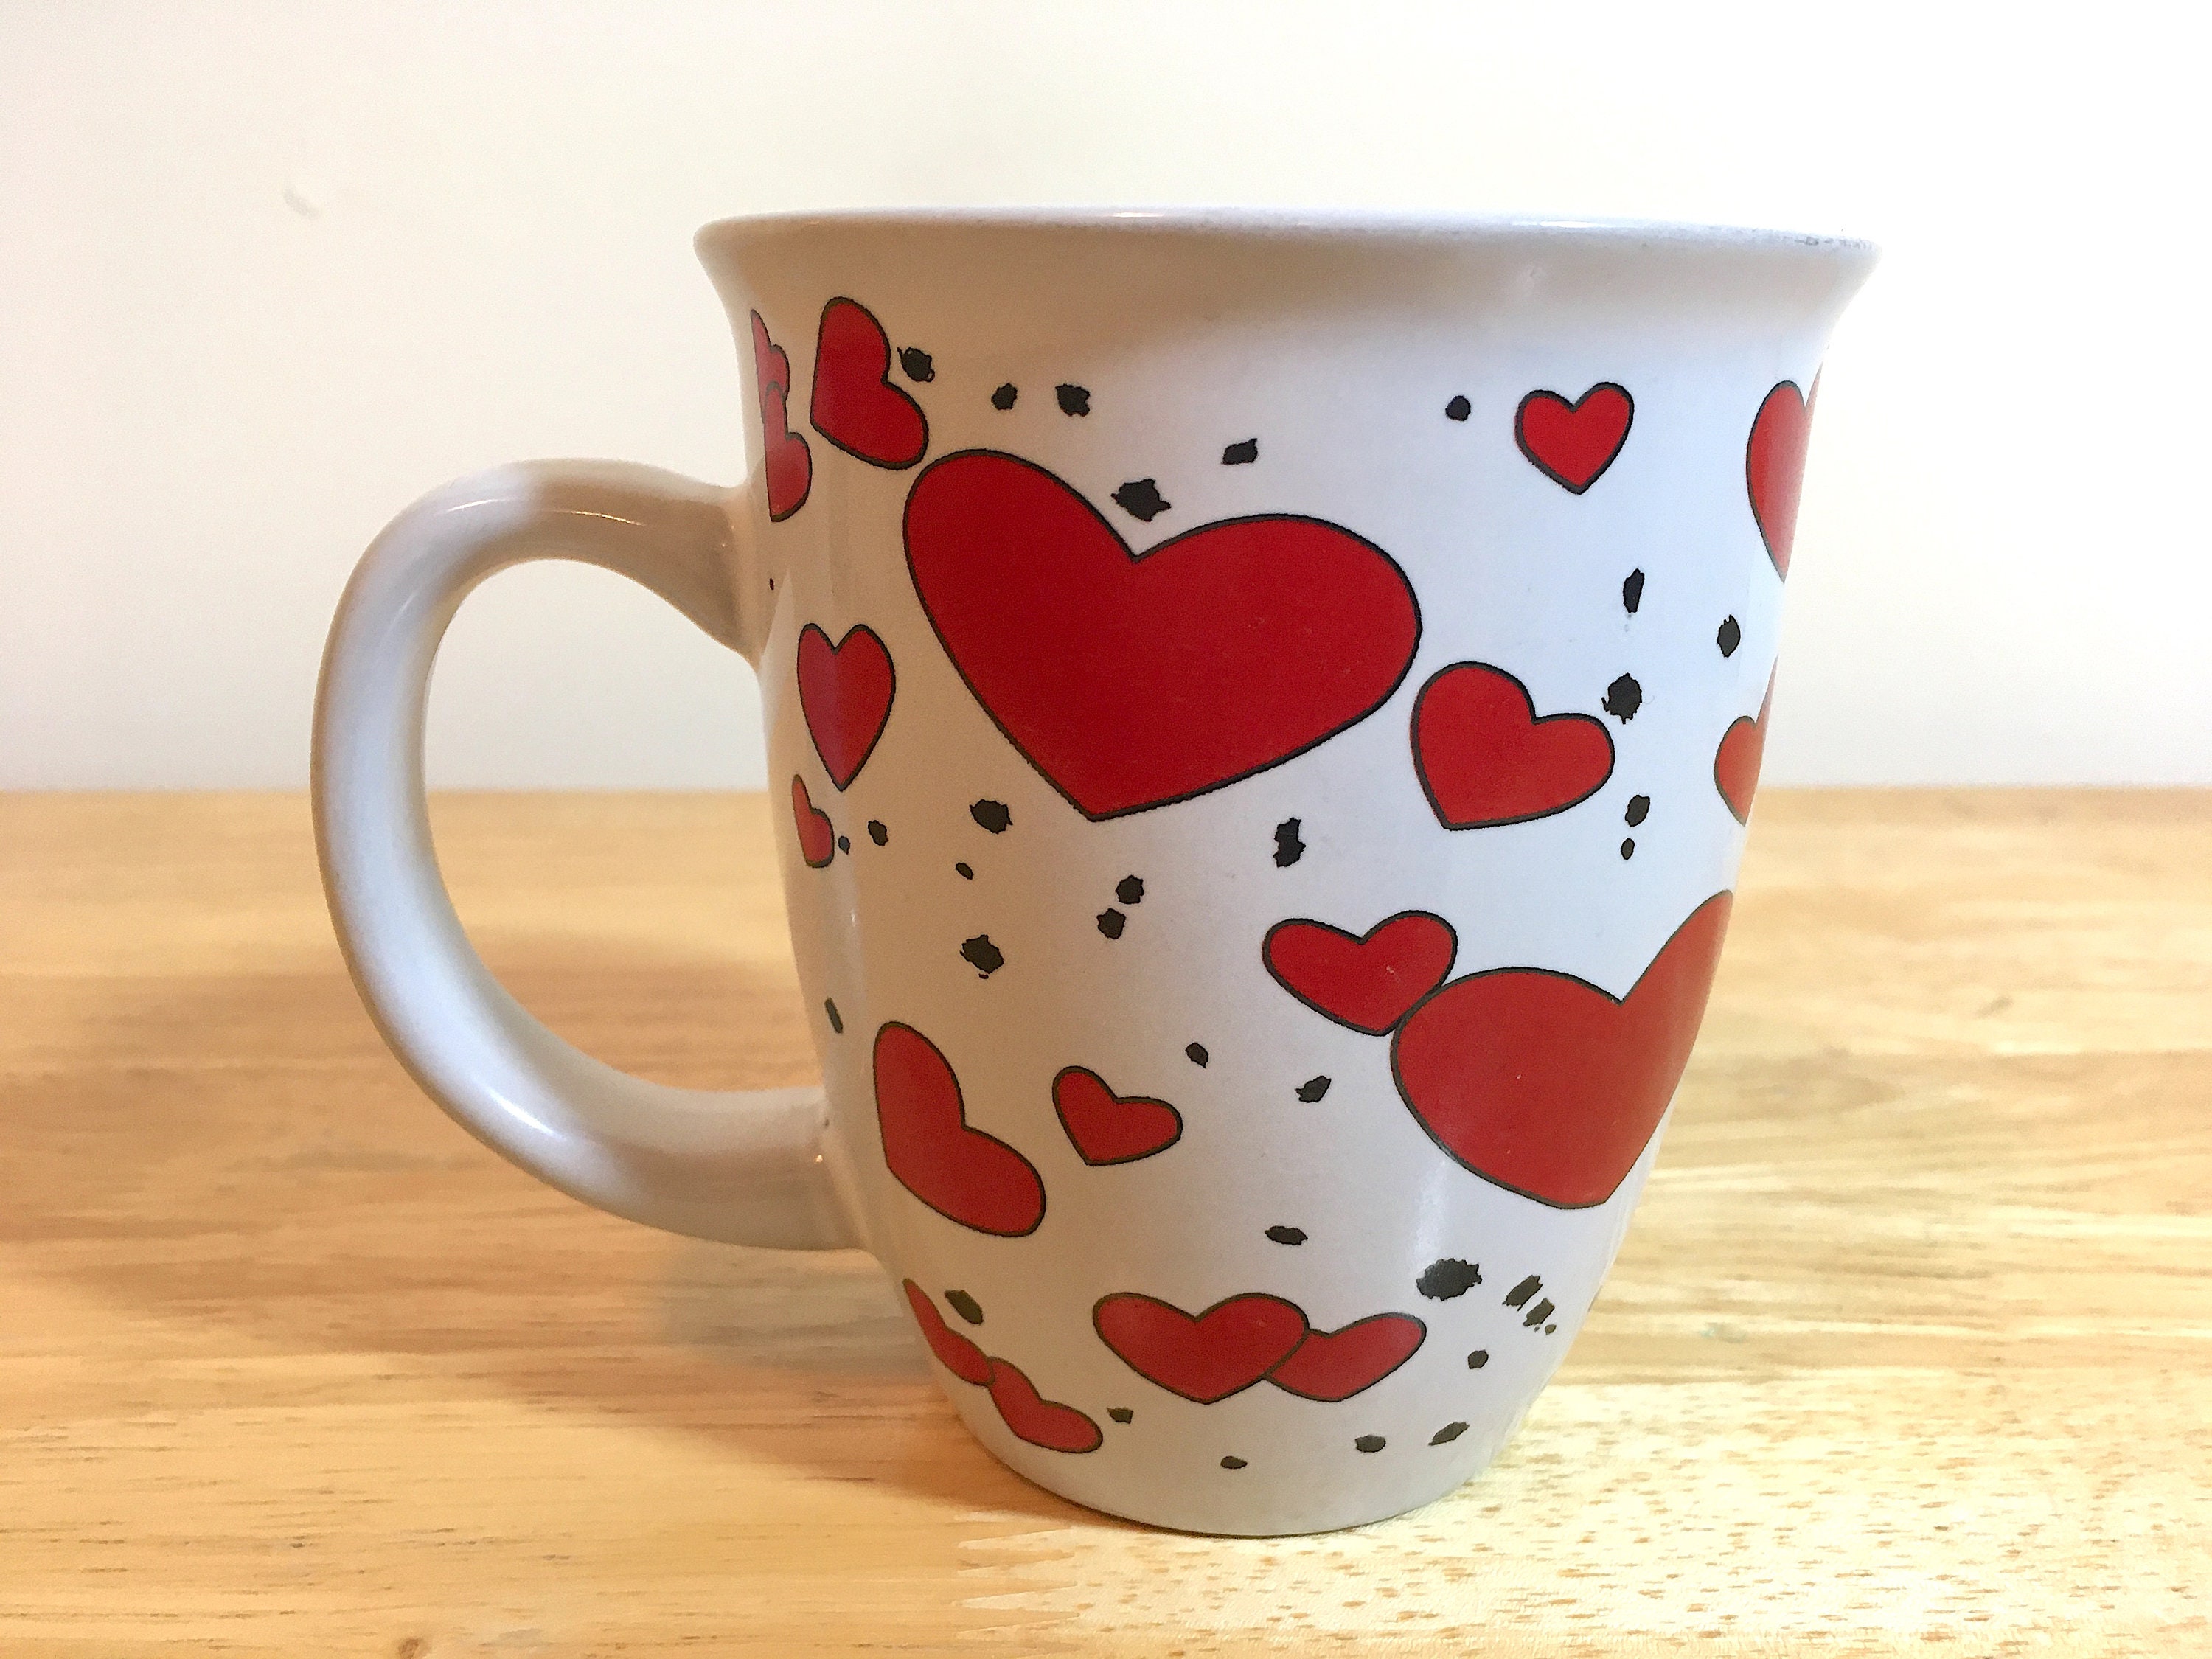 Love Mug Clear Glass Gold Hearts with Metal Heart Handle Coffee Lovers Cup